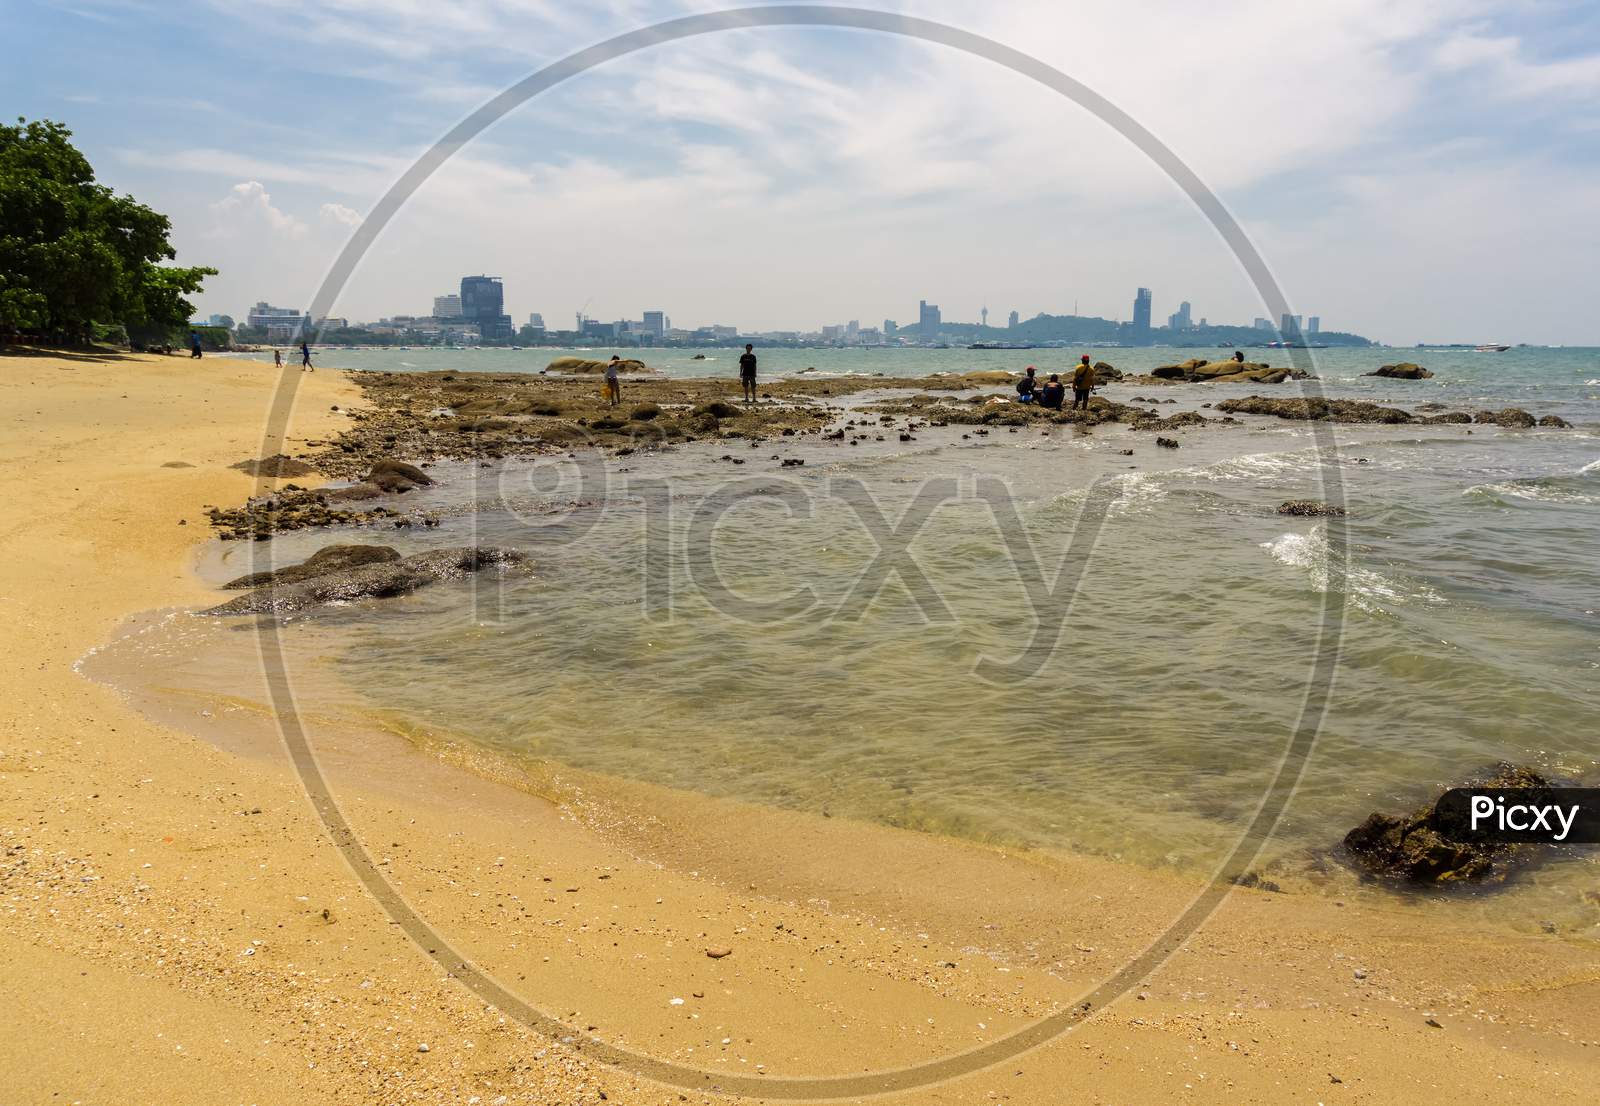 Pattaya,Thailand - October 13,2018: Coral Beach This Is A Small Beach With Many Rocks And Stones And With A View To The City.